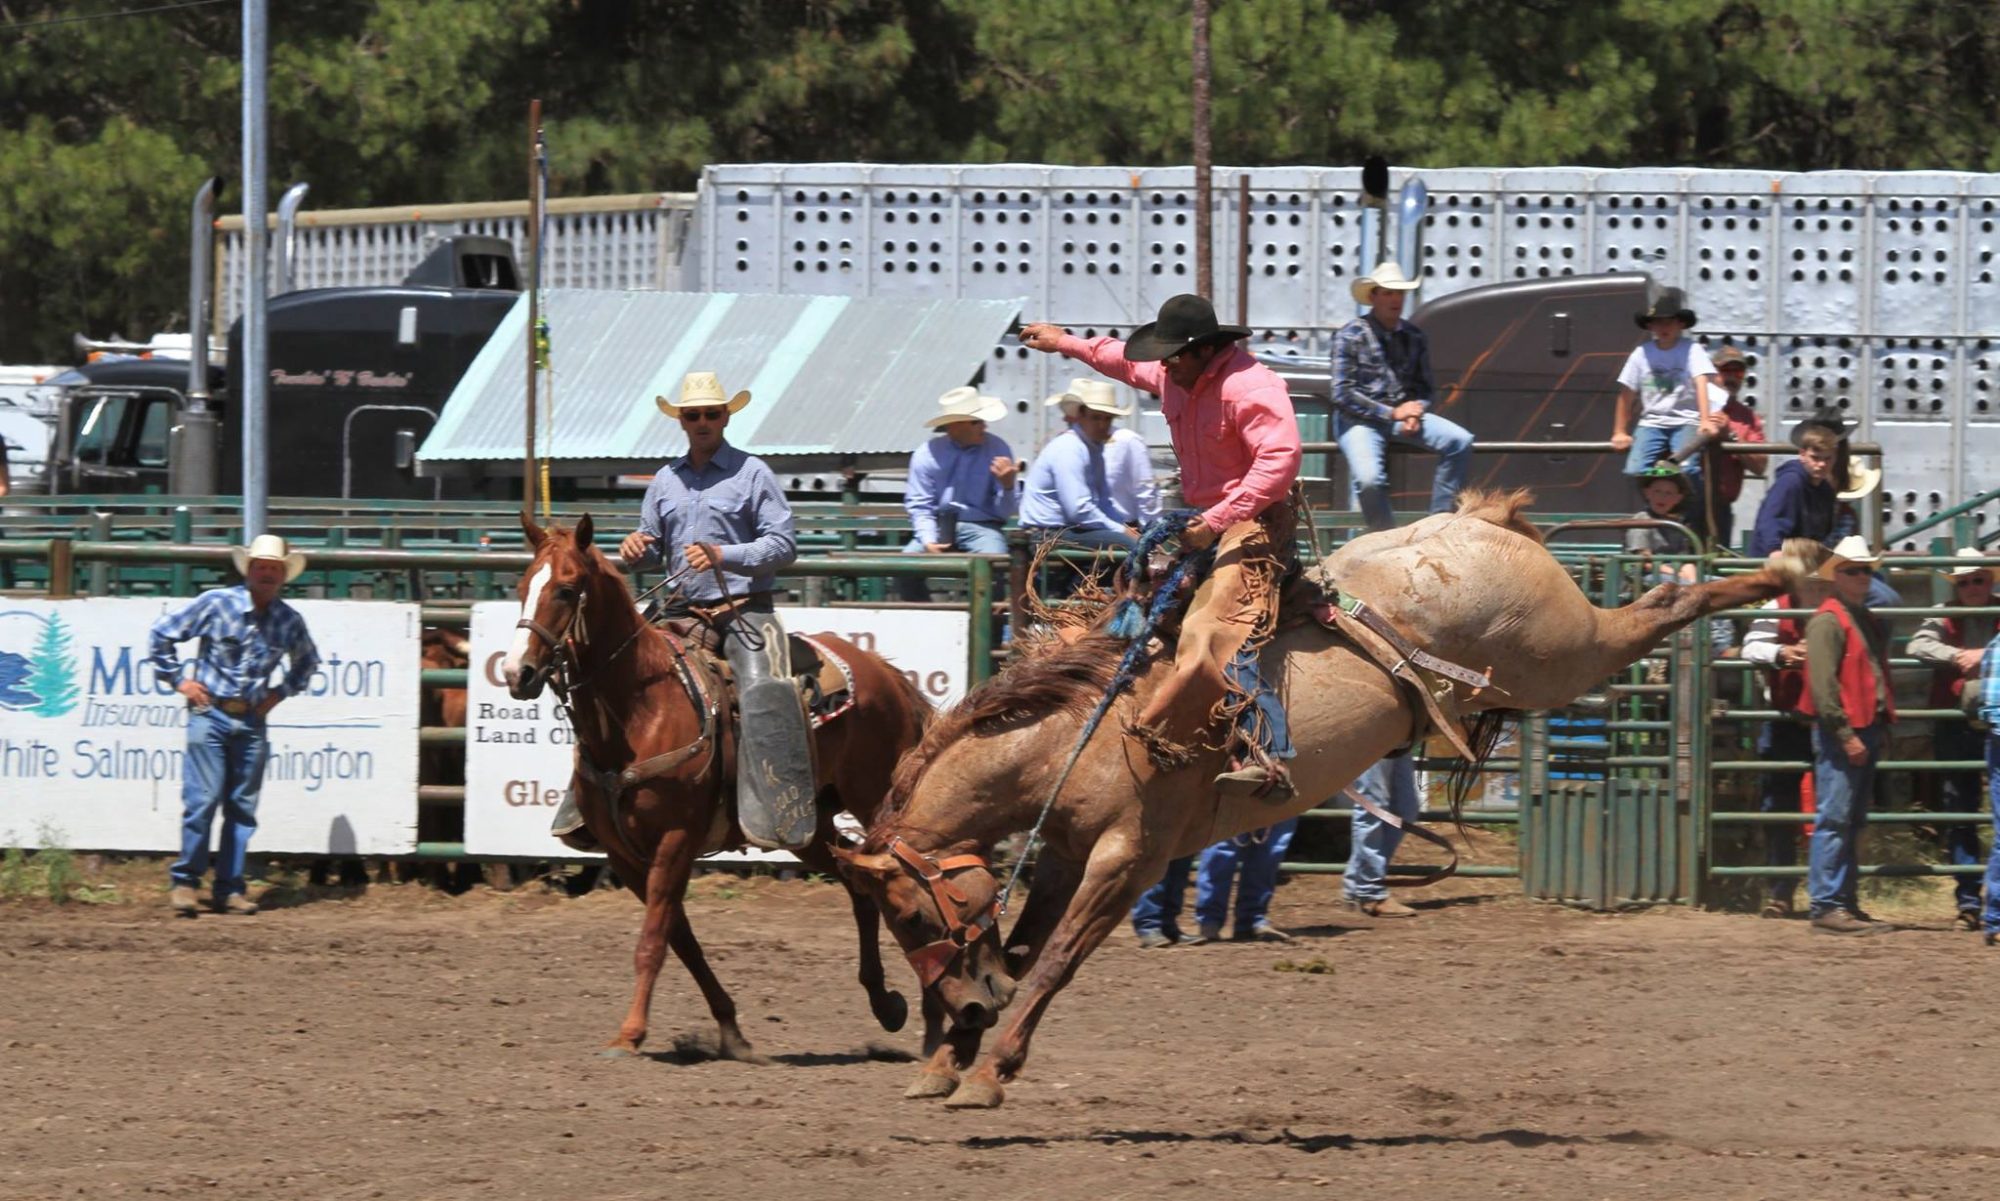 83rd Annual Glenwood Rodeo